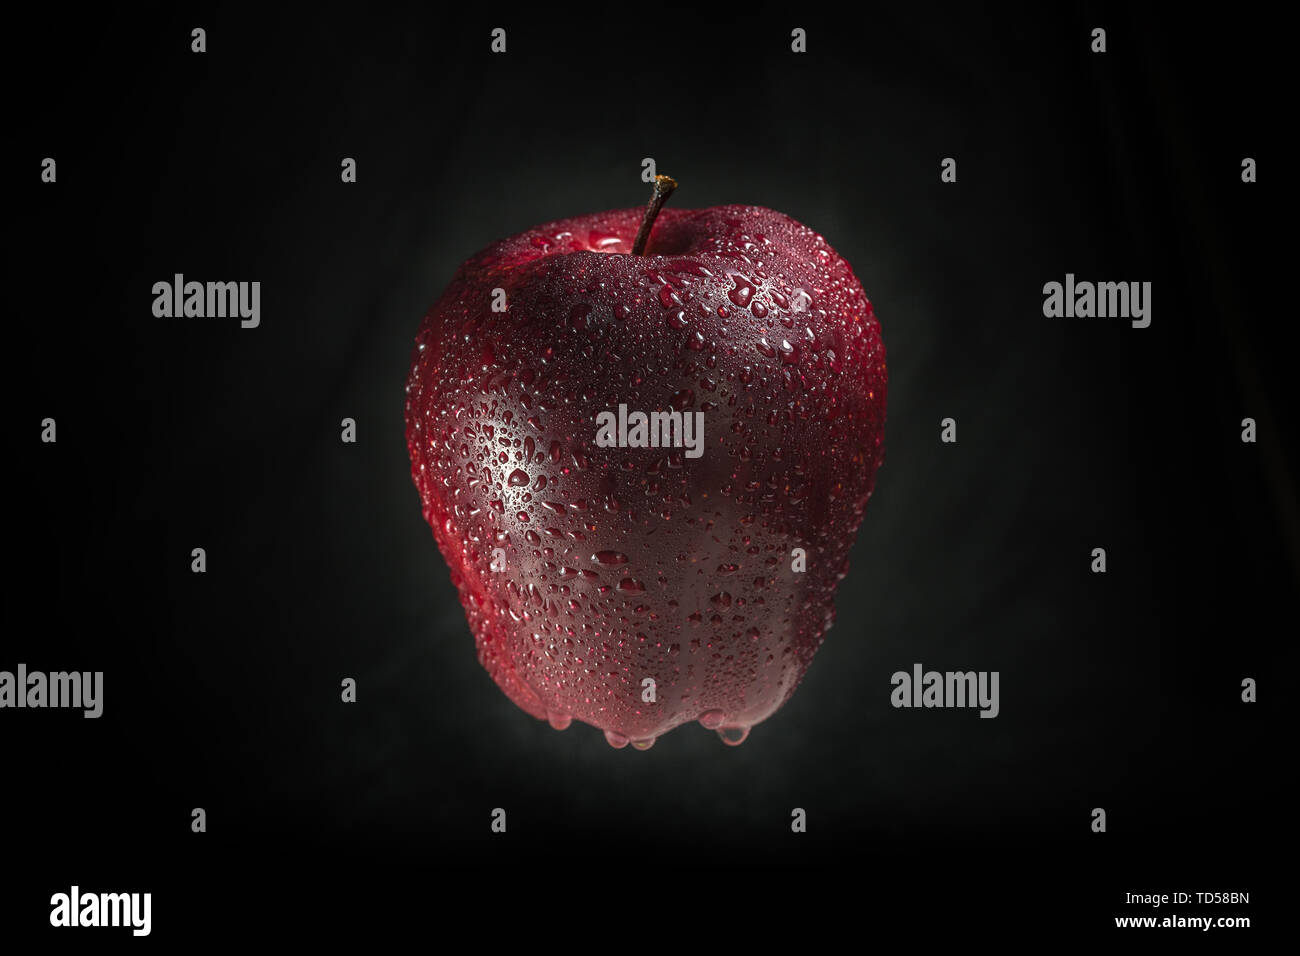 A red apple. Stock Photo